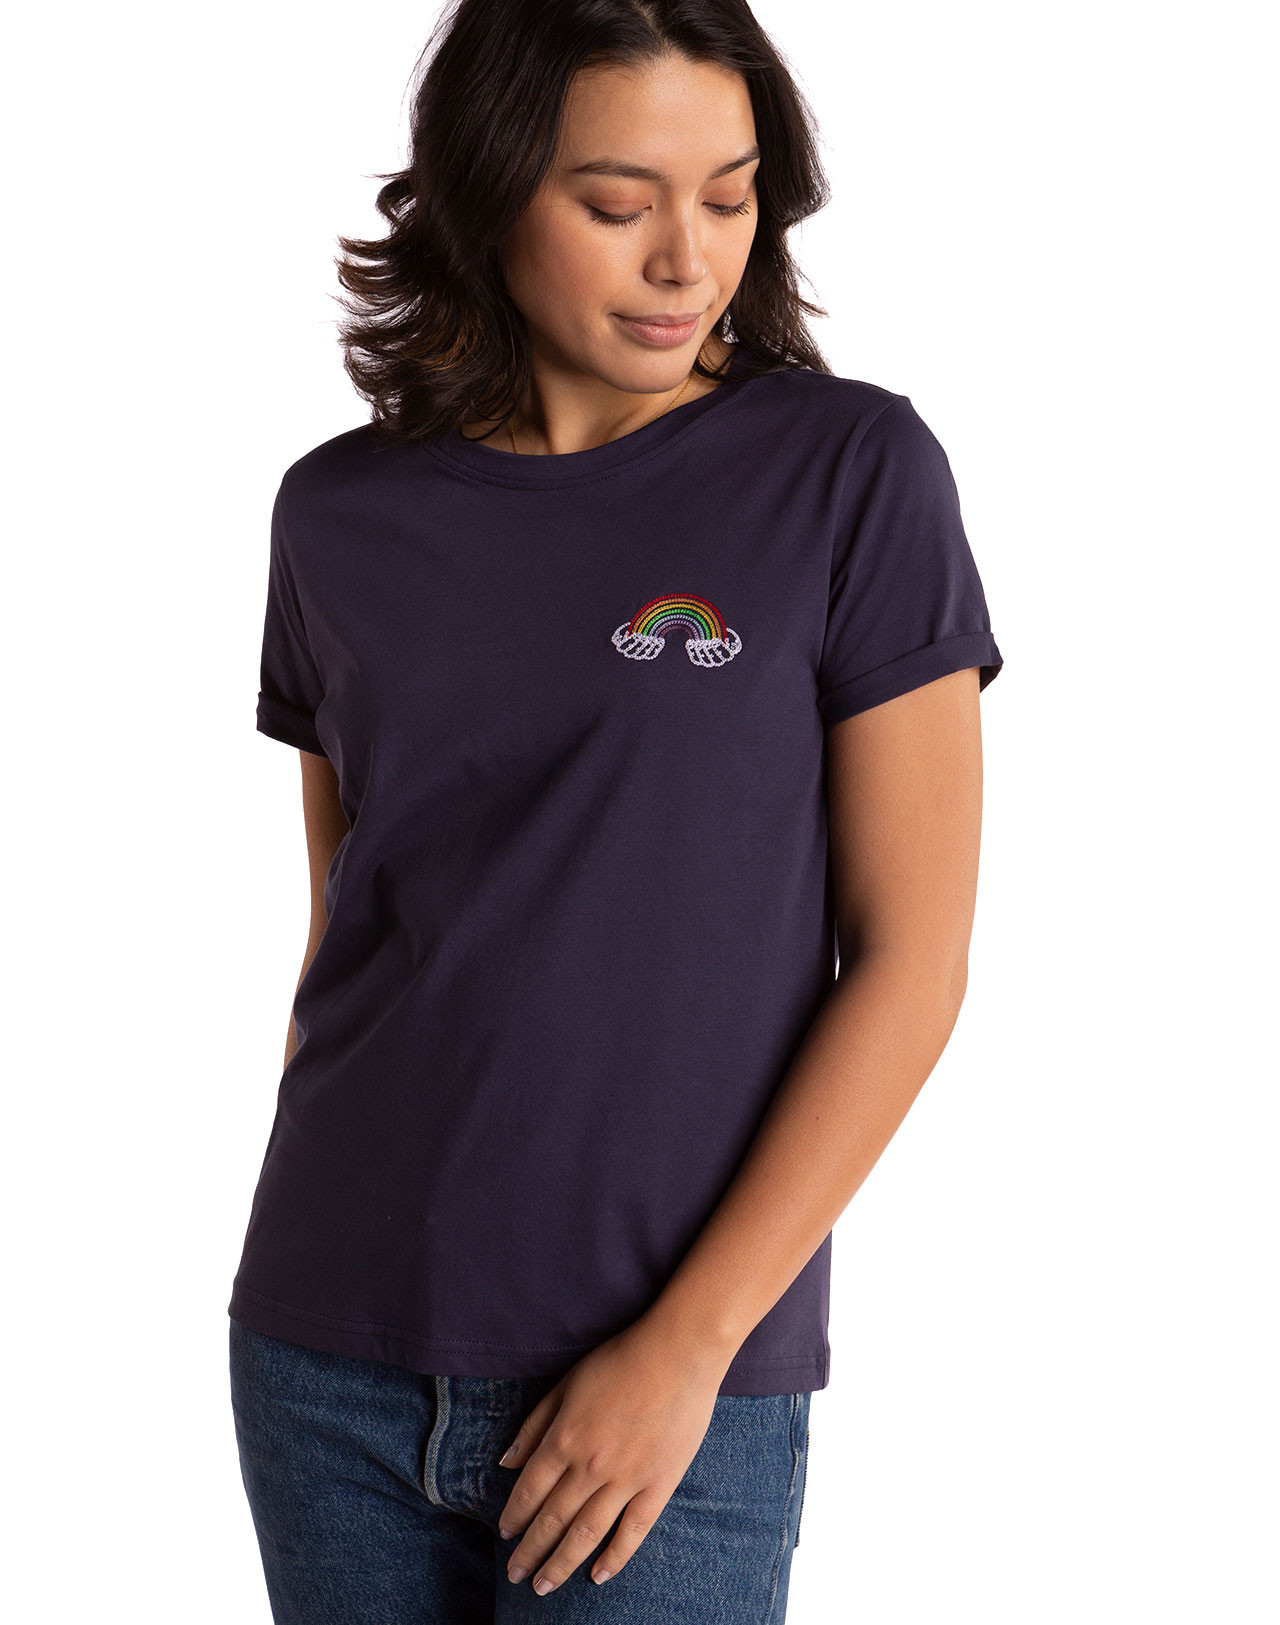 Rainbow T-shirt Size S Colors Navy Blue - OLOW